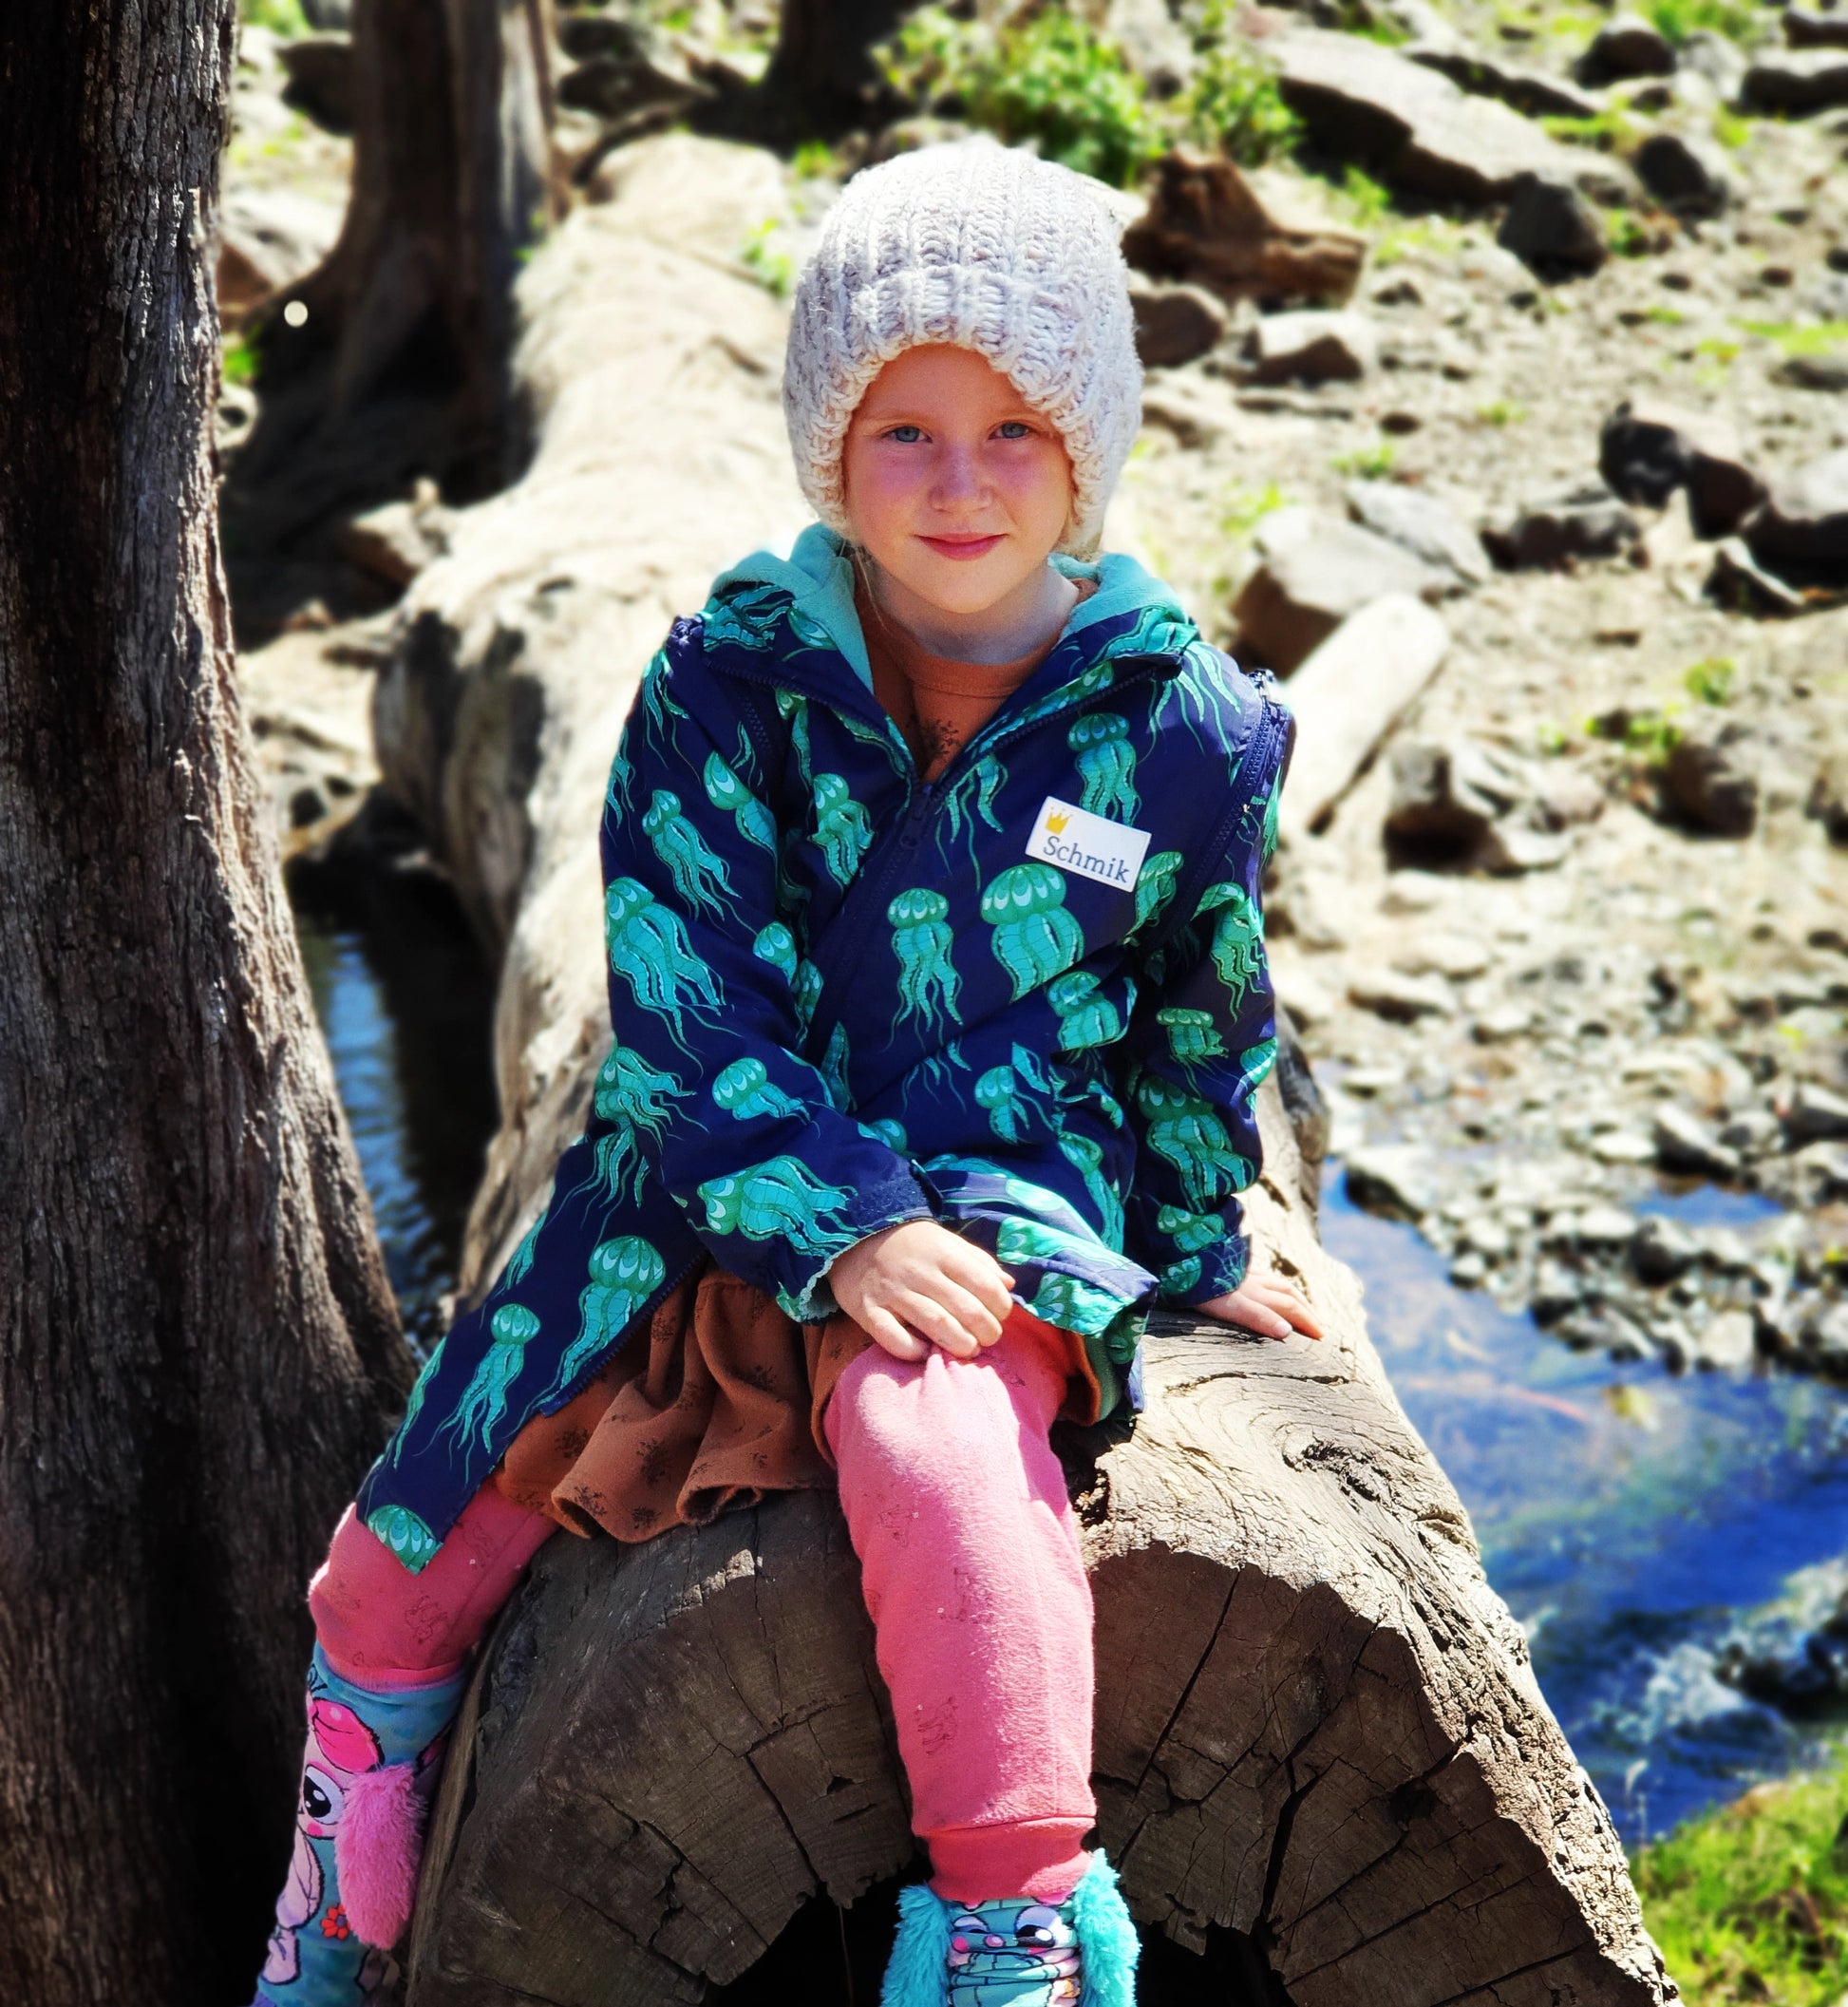 Child sitting on a log wearing a schmik swim parka. Child is camping and wears the jacket to keep warm.